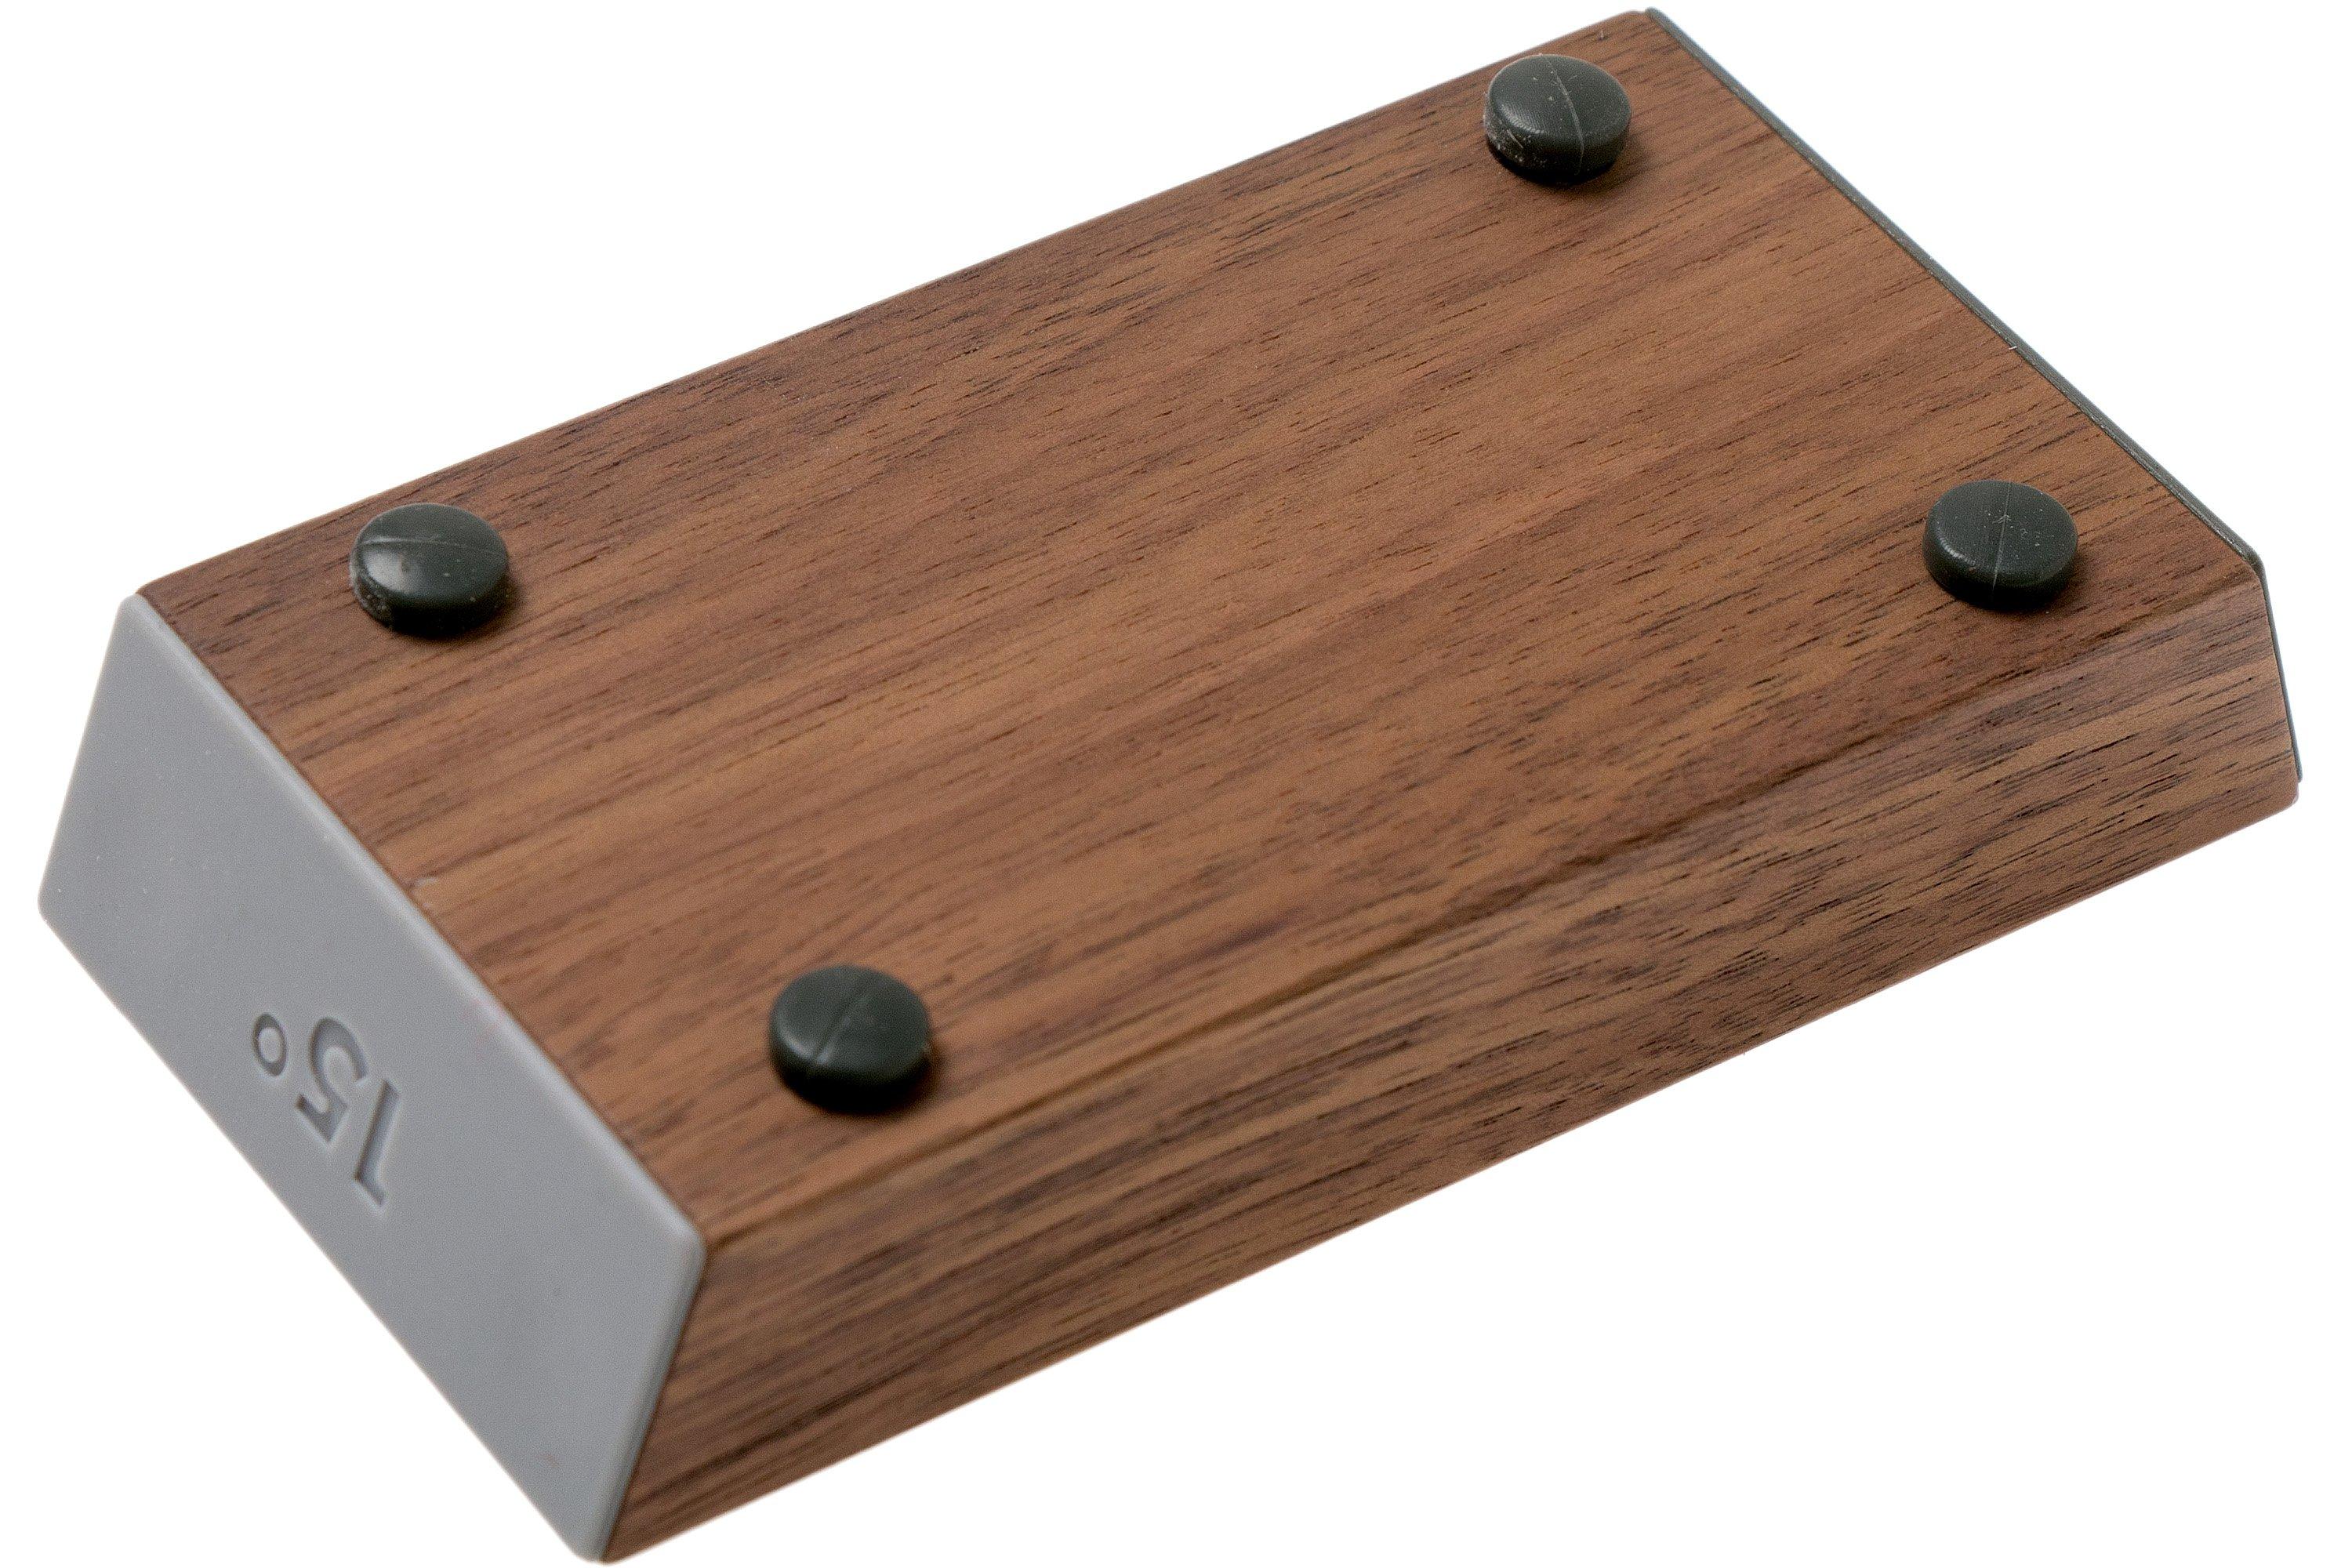 Horl - 2 WALNUT - sharpener with diamond and ceramic disc - Made in Germany